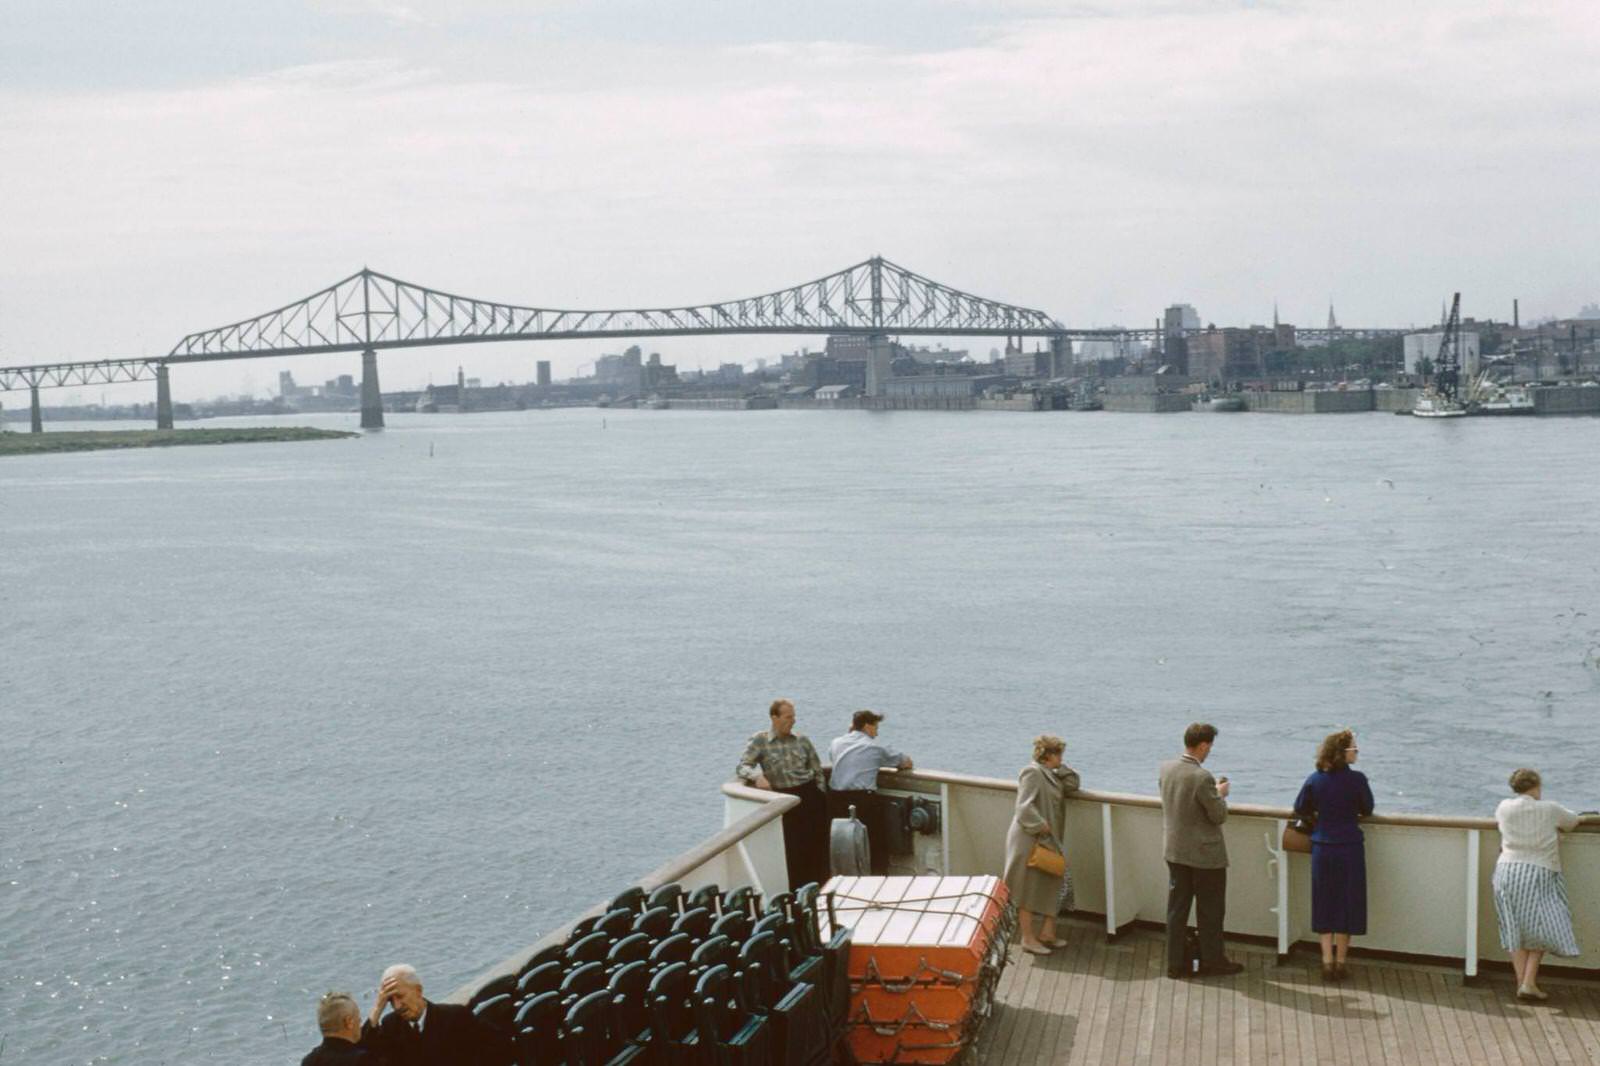 Passengers stand on the deck of a boat on the St Lawrence River beside the port district of the city of Montreal in the province of Quebec in Canada, 1960.